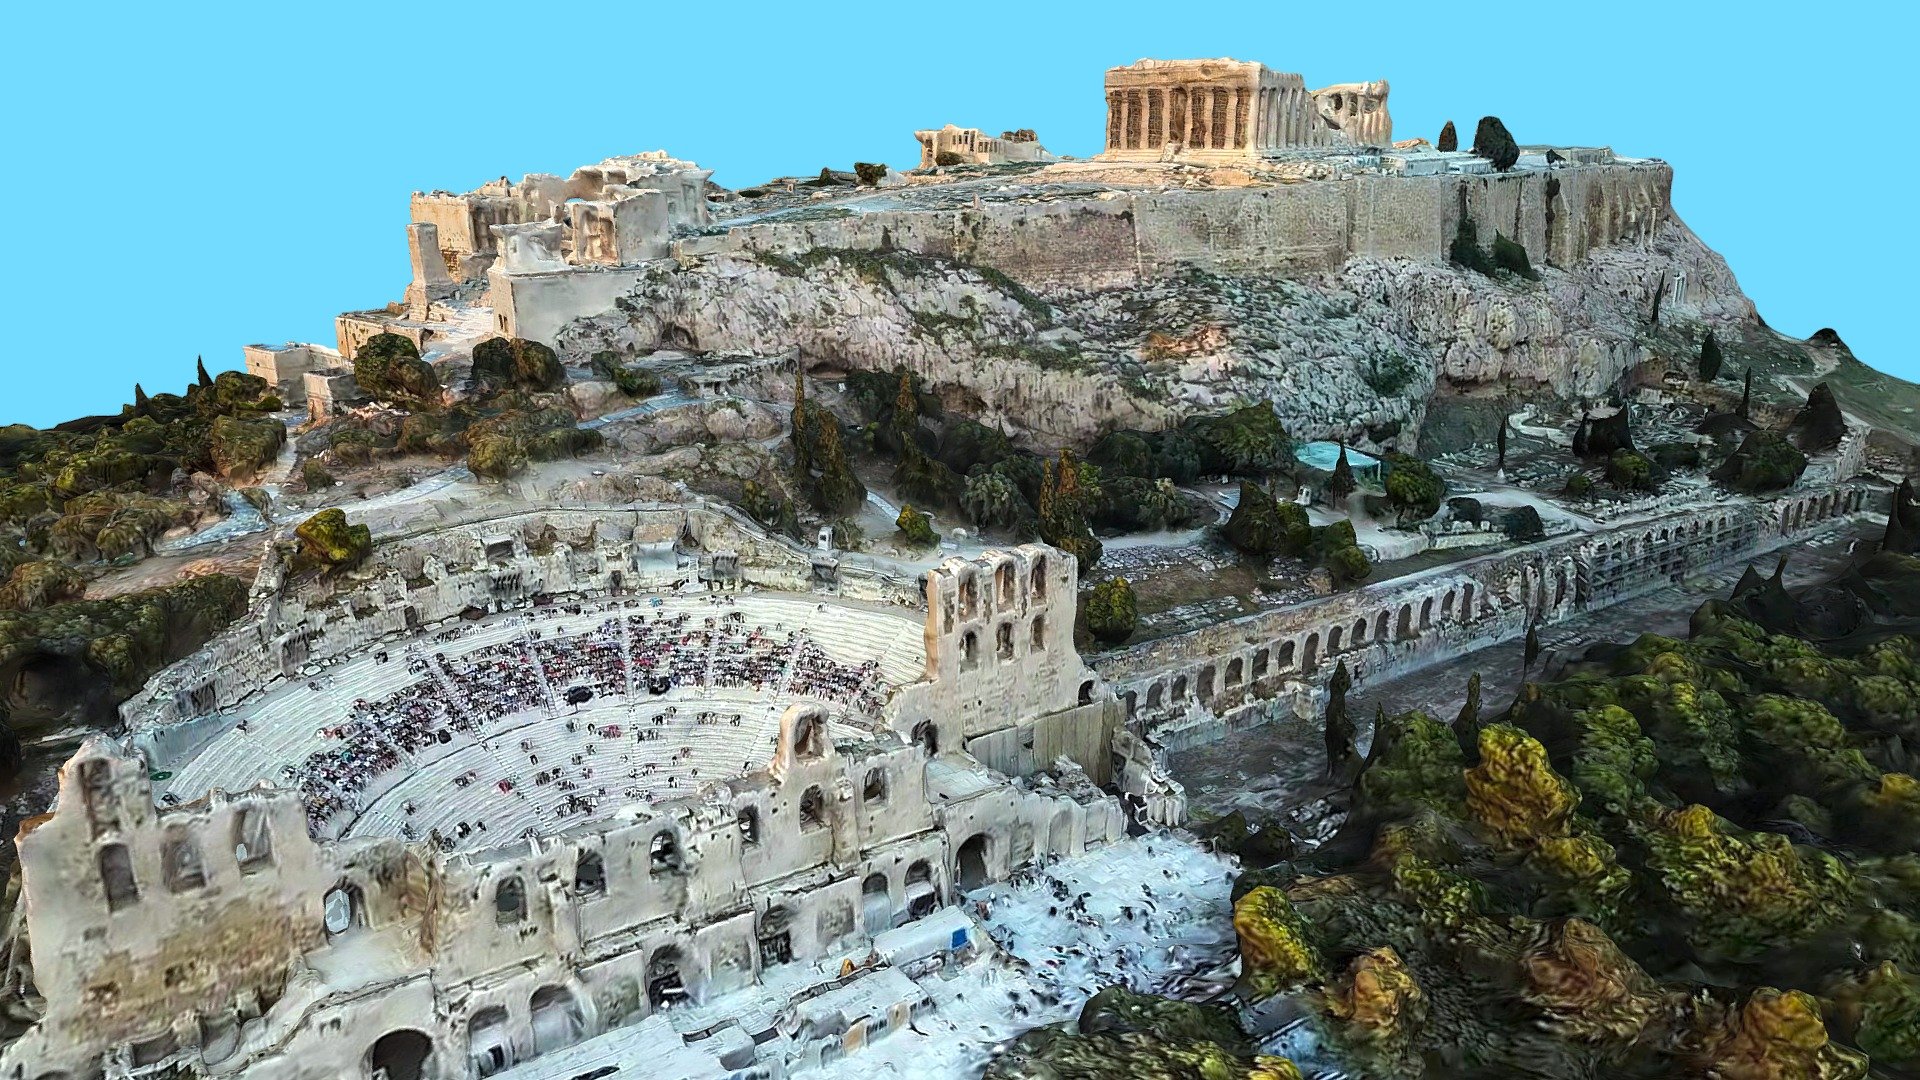 The Acropolis of Athens is an ancient citadel located on a rocky outcrop above the city of Athens and contains the remains of several ancient buildings of great architectural and historical significance, the most famous being the Parthenon. The word acropolis is from the Greek words ἄκρον (akron, &ldquo;highest point, extremity